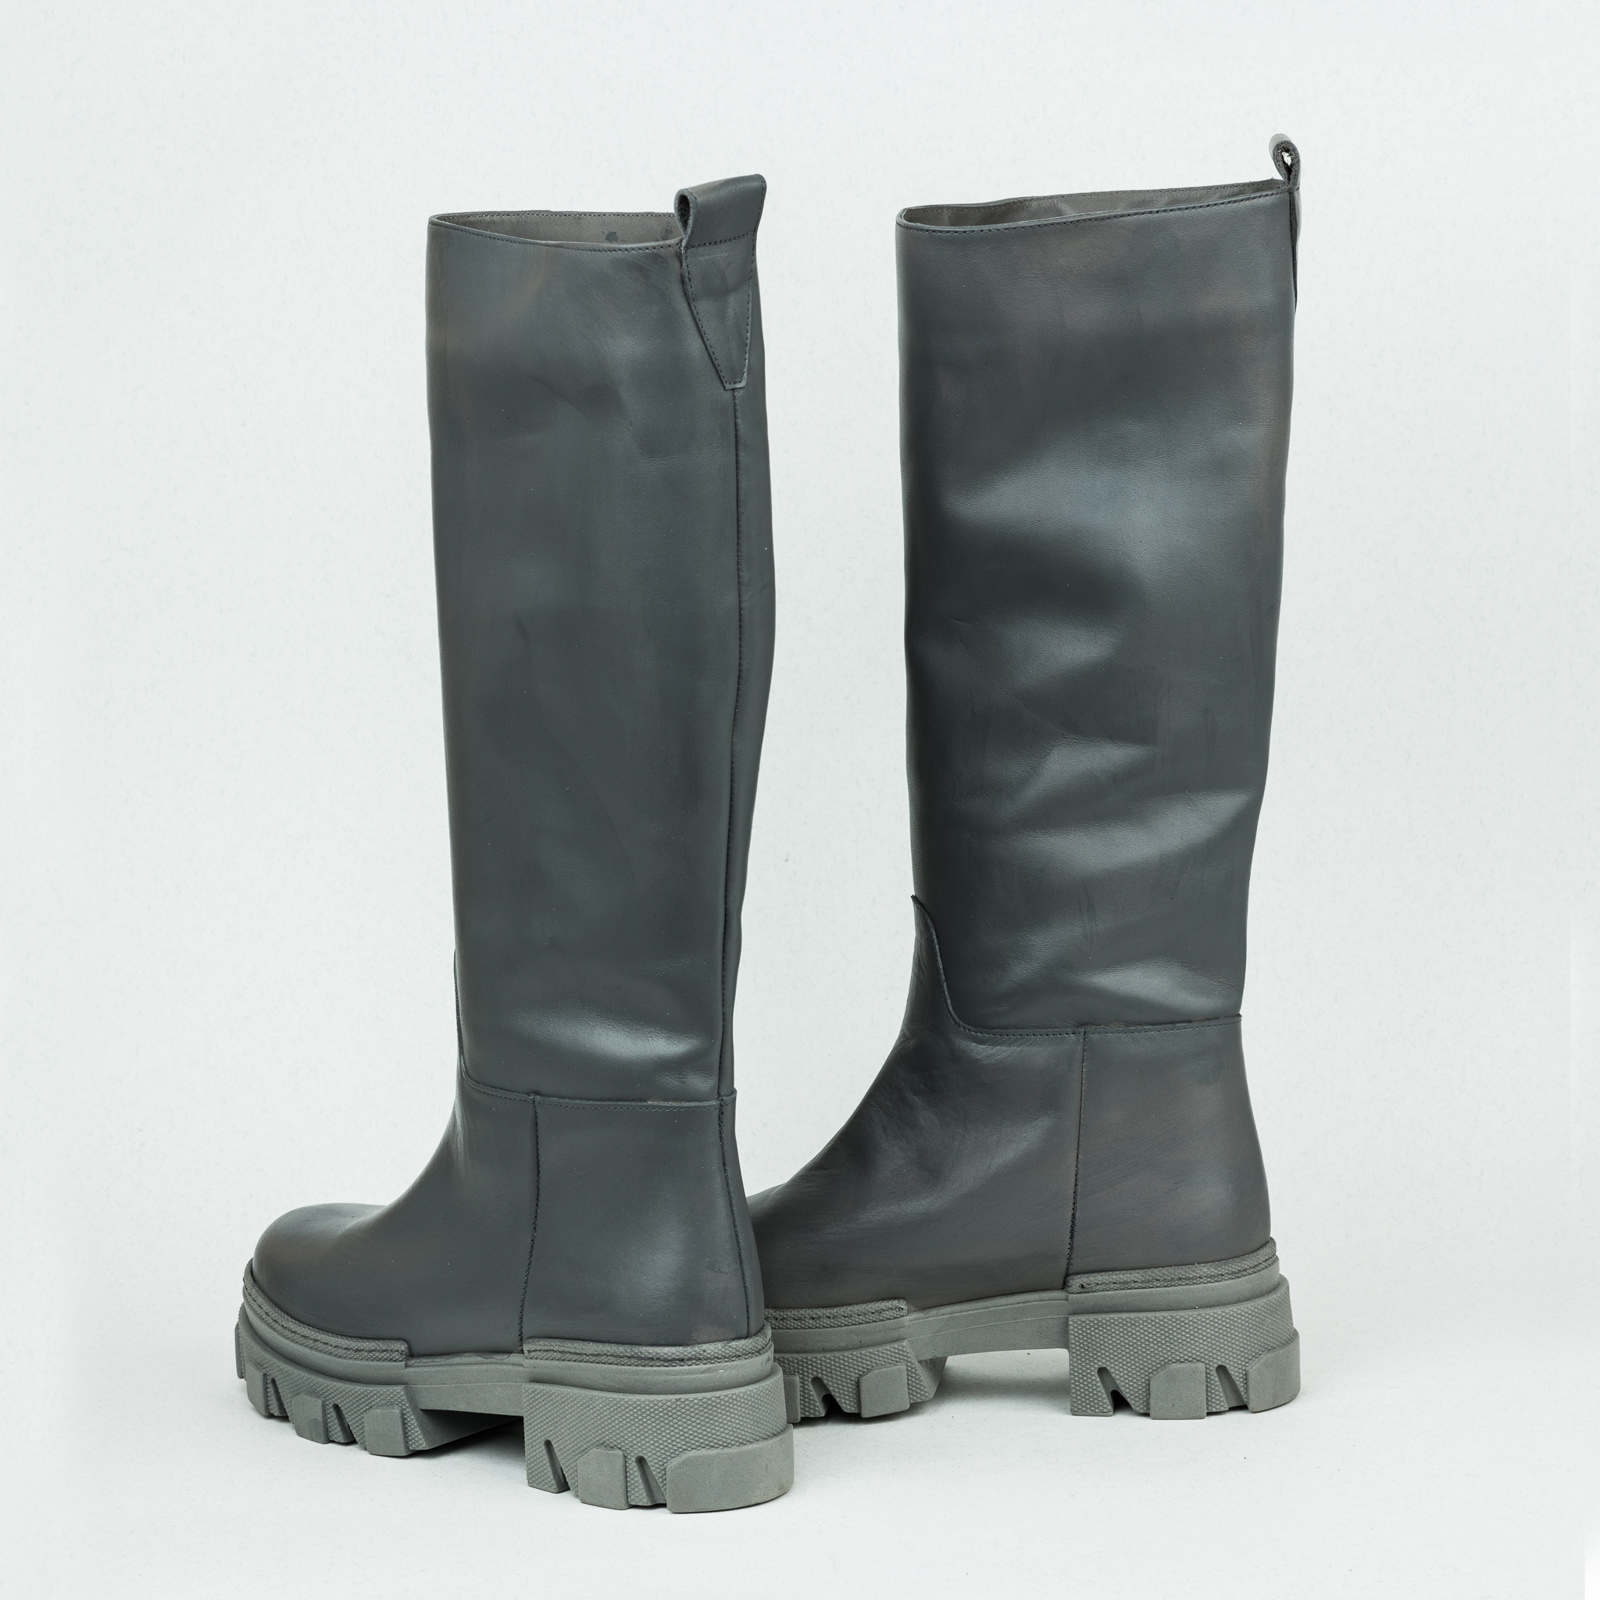 Leather WATERPROOF boots B128 - GREY